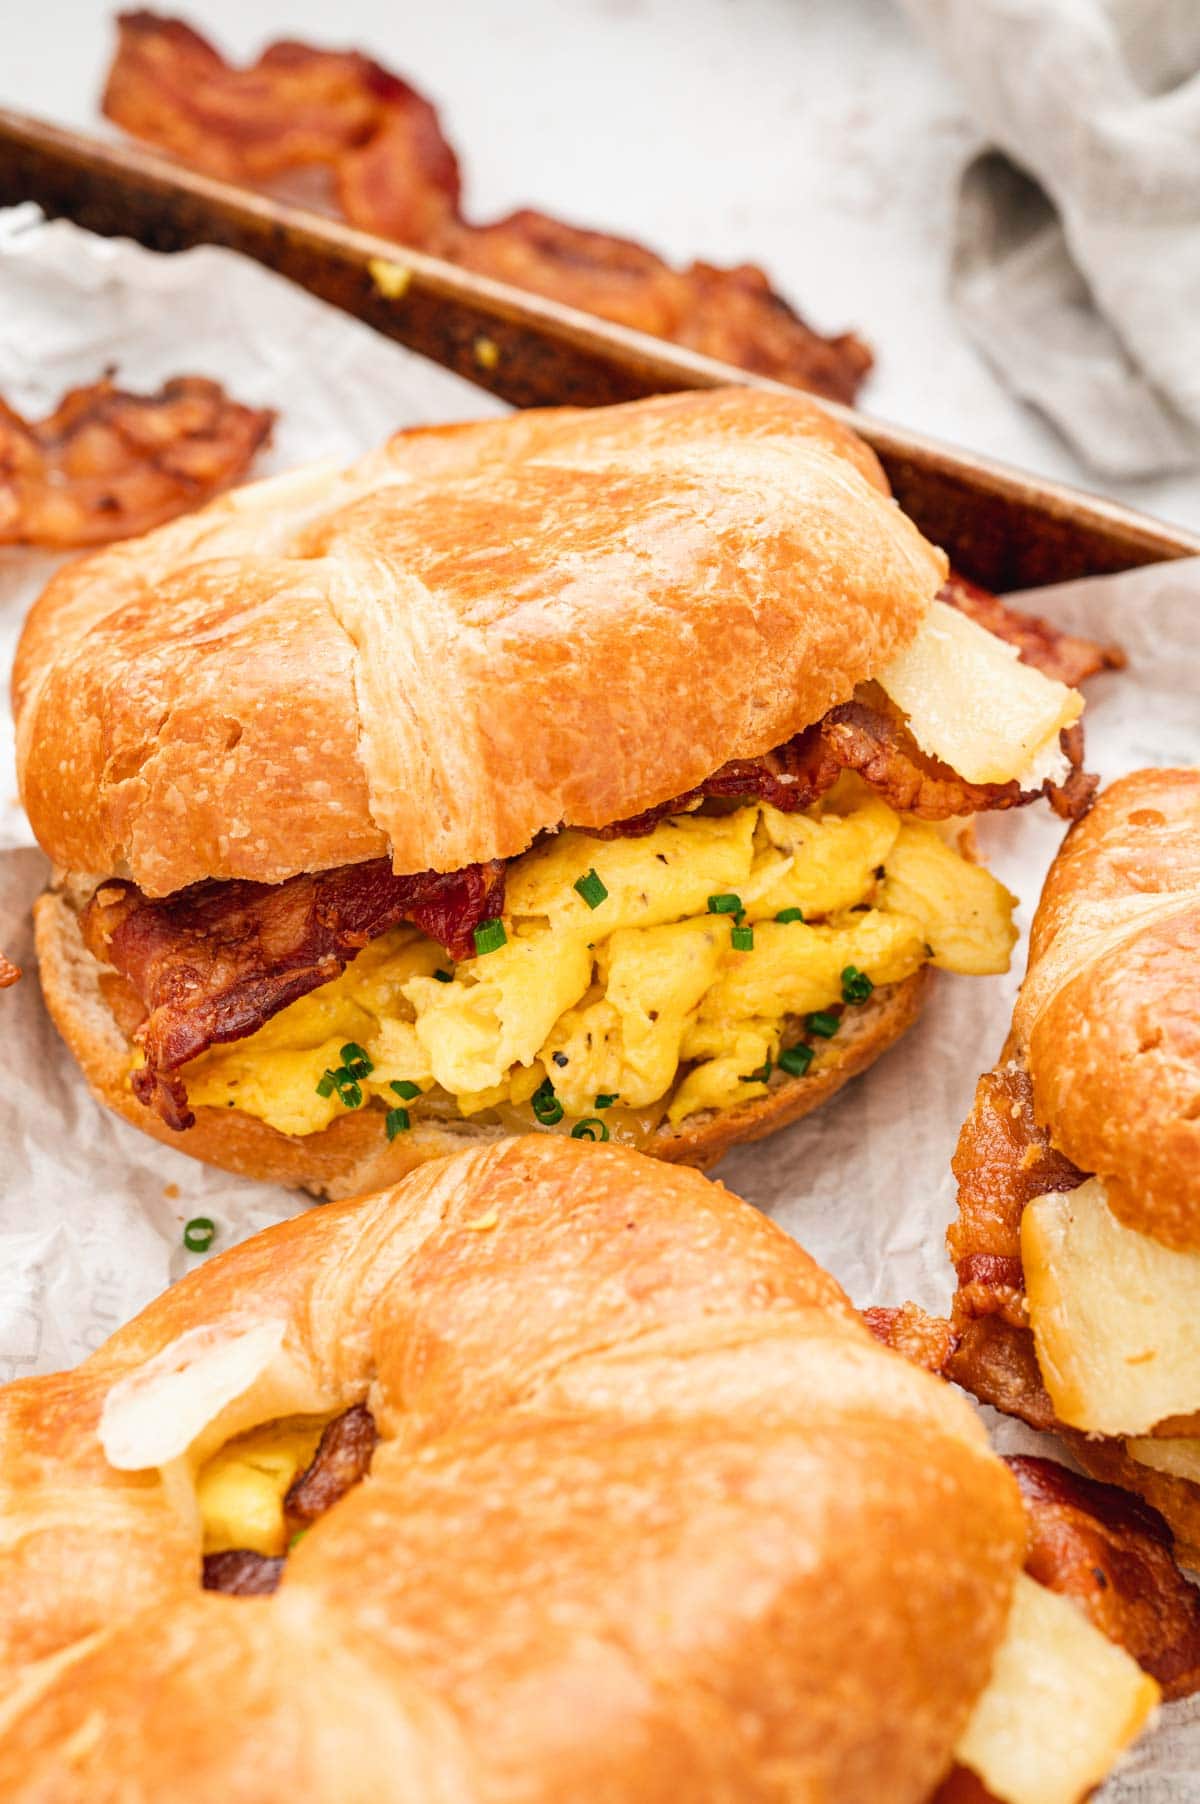 Croissants stuffed with bacon, cheese and scrambled eggs.